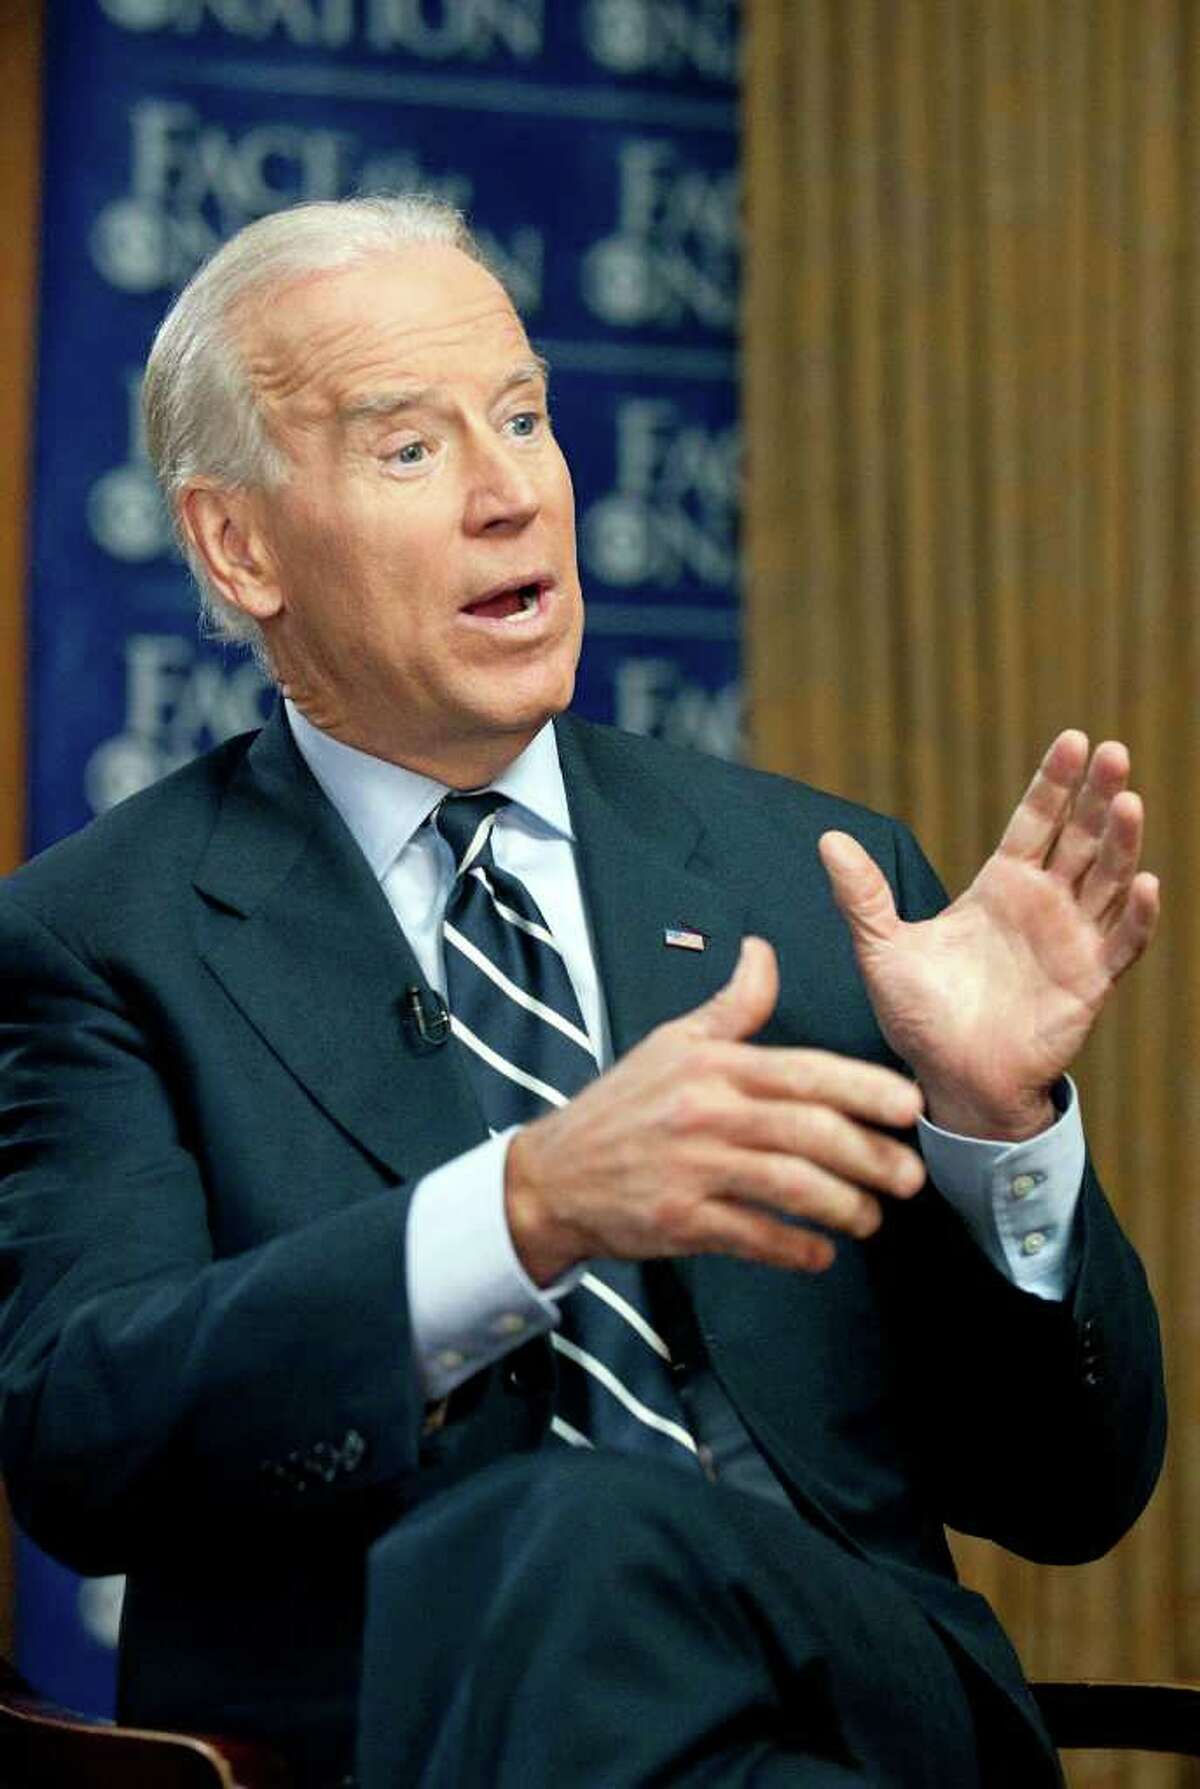 In this March 29, 2012 photo provided by CBS News, Vice President Joseph Biden answers a question during a pre-taped interview for the CBS show "Face the Nation" in Milwaukee. (AP Photo/CBS News, Chris Usher)